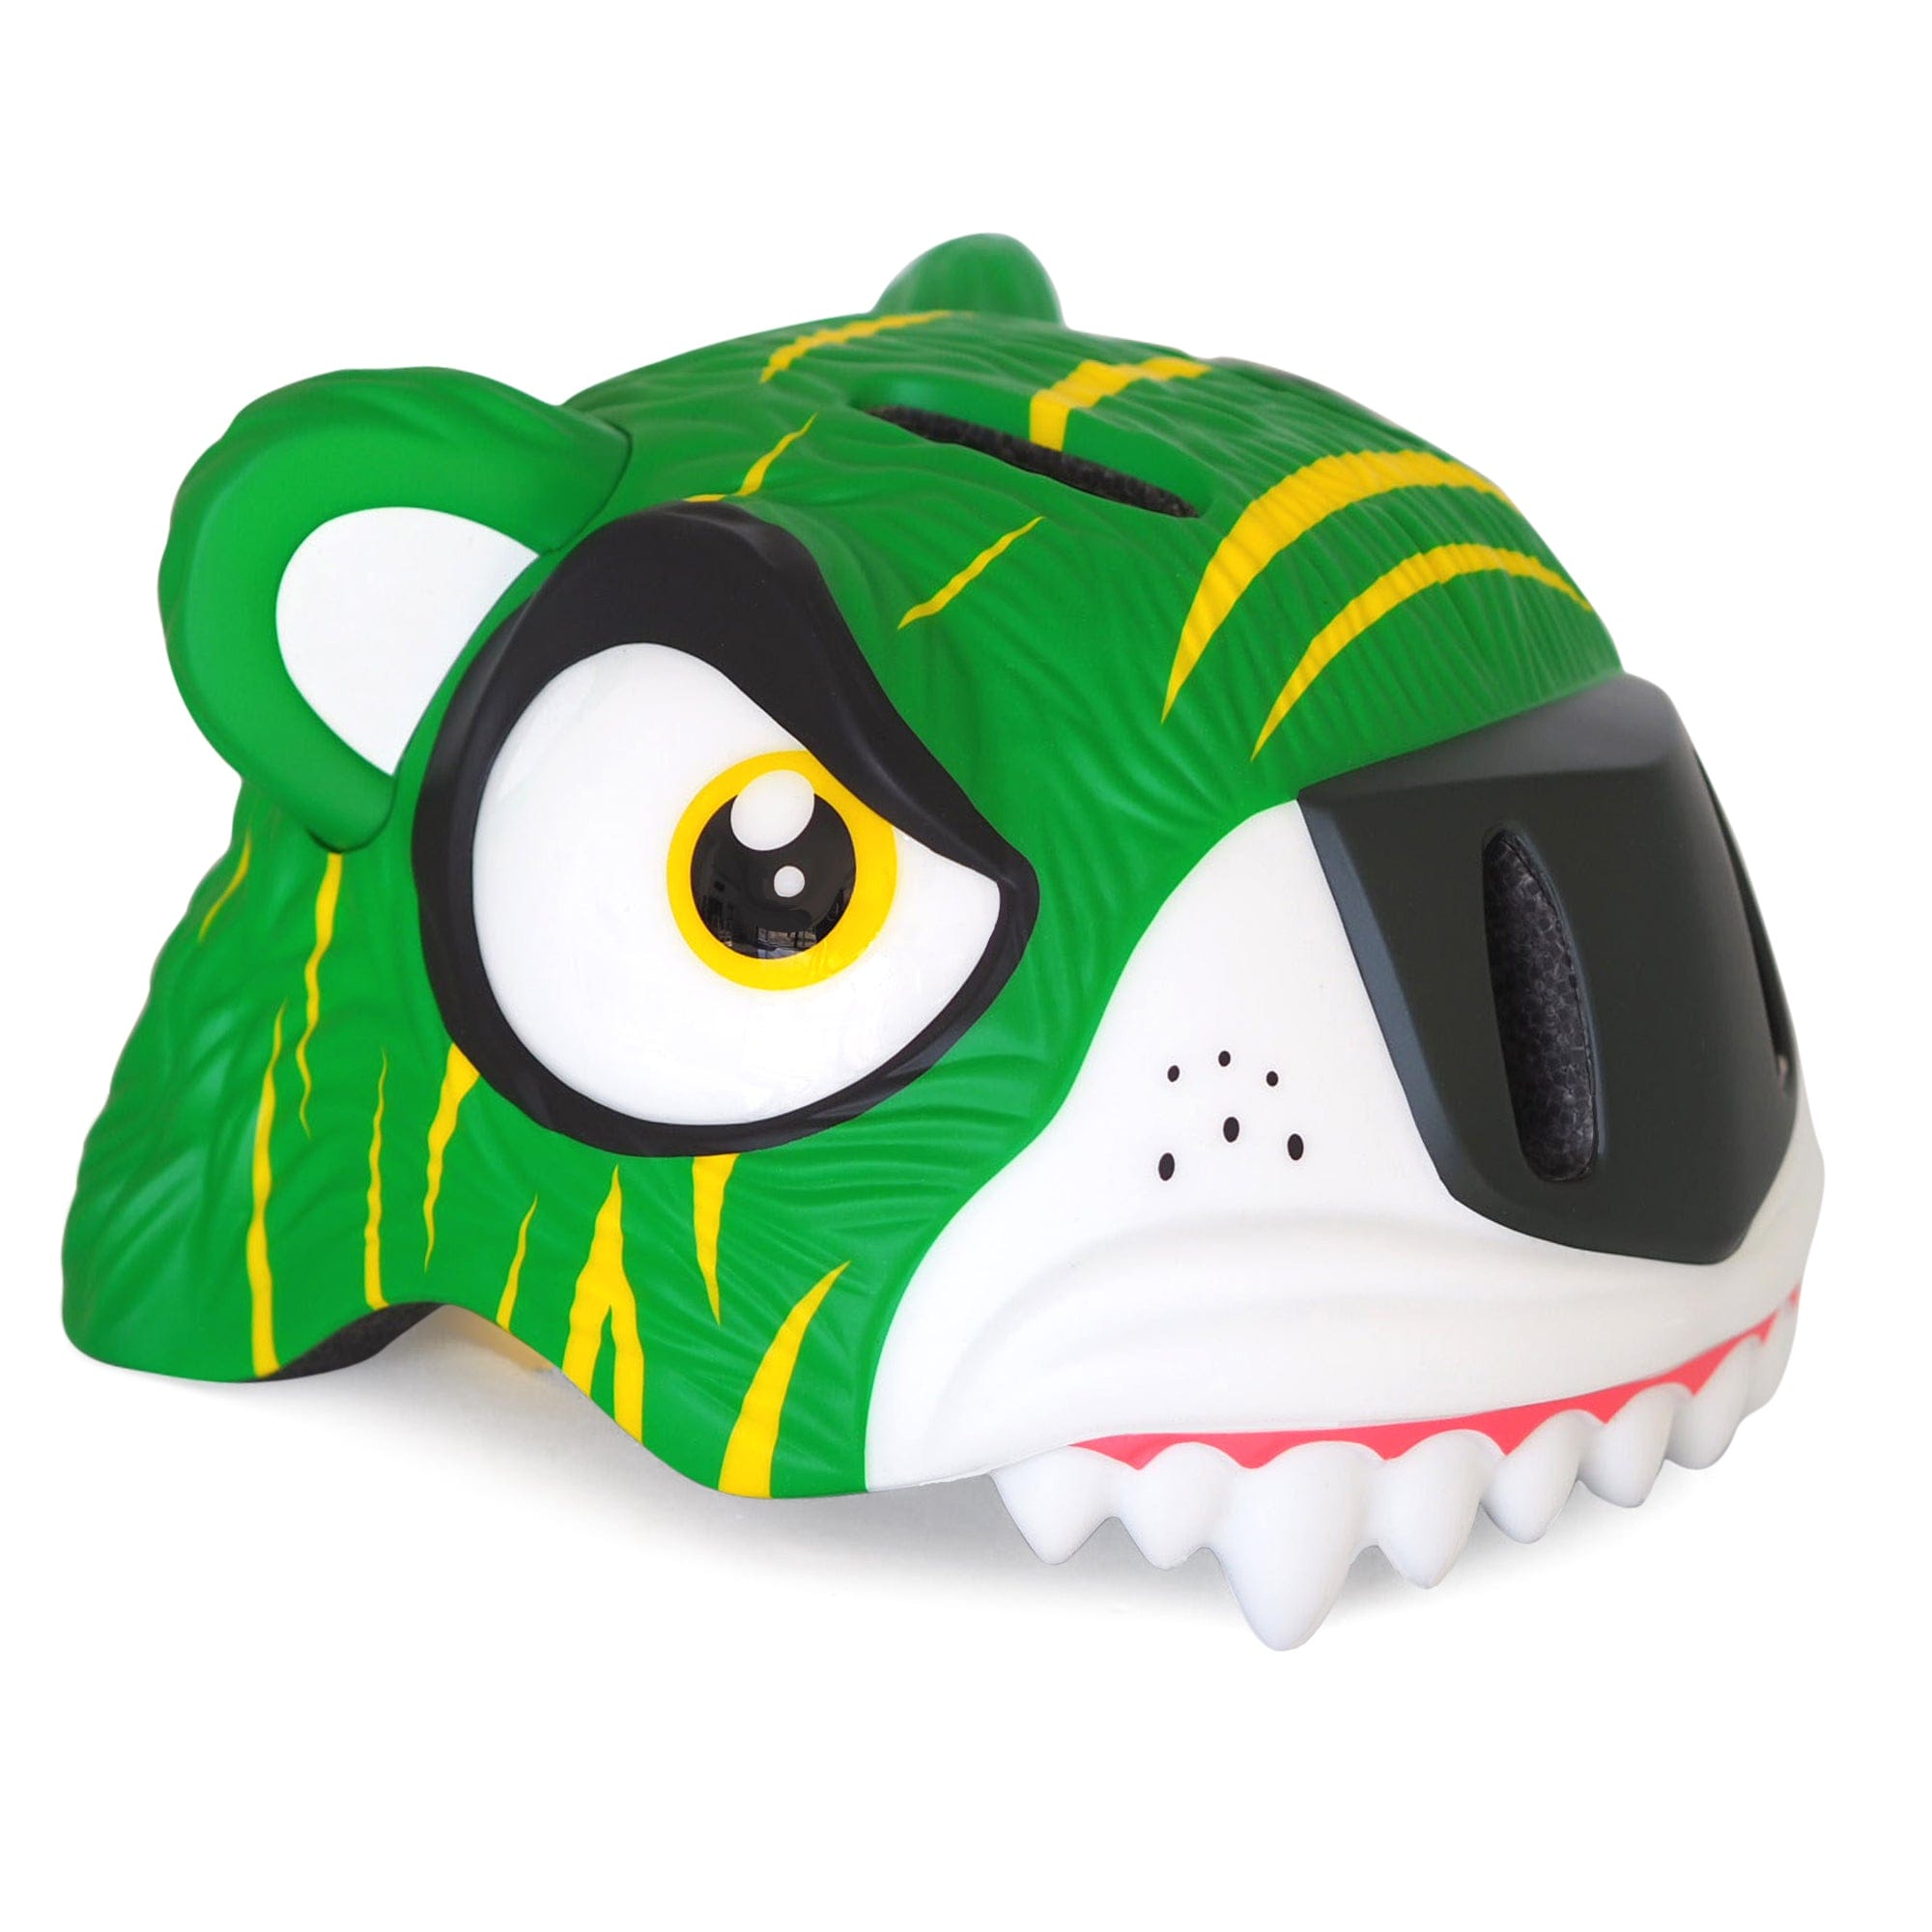 Crazy Safety - Tiger Bicycle Helmet - Green (100101-02-01)